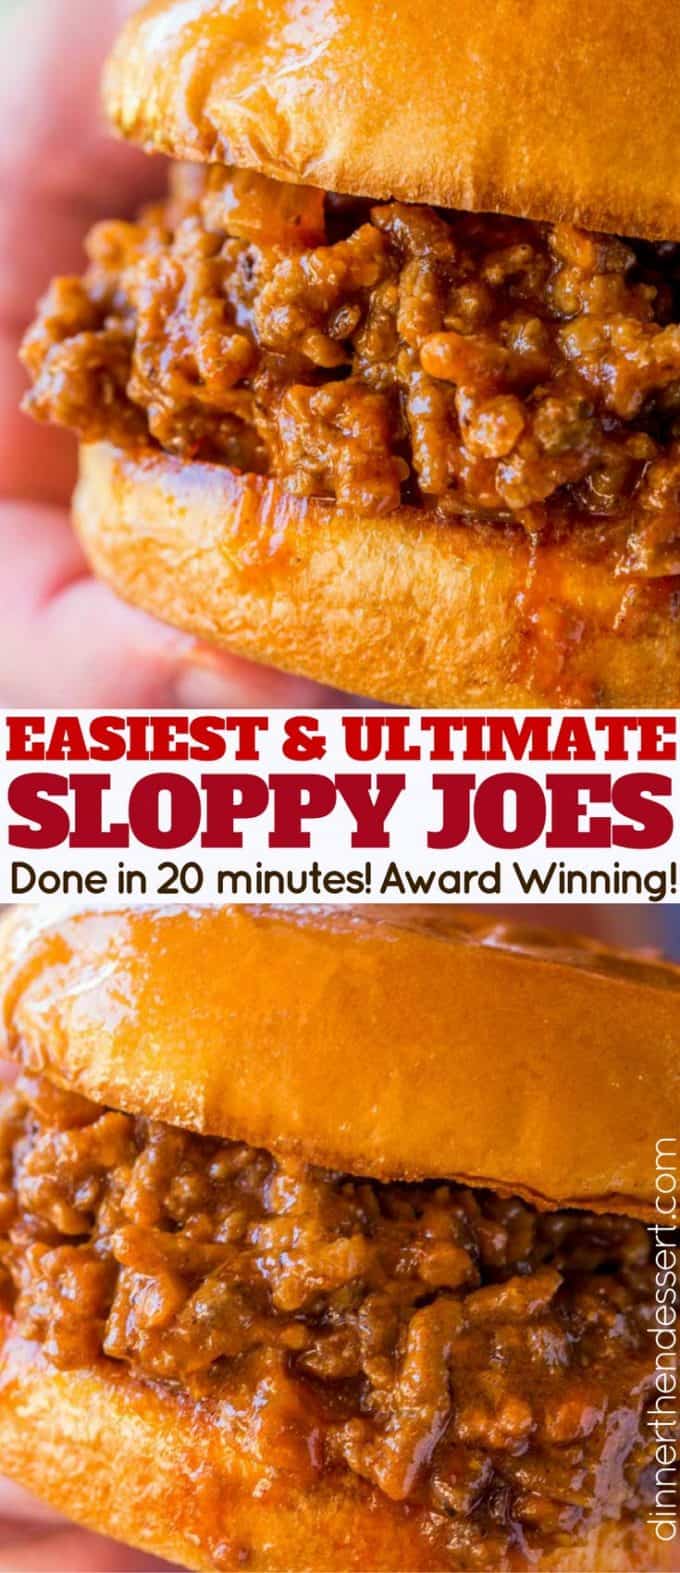 The Ultimate Sloppy Joes made at home in just 20 minutes with no canned sauces!